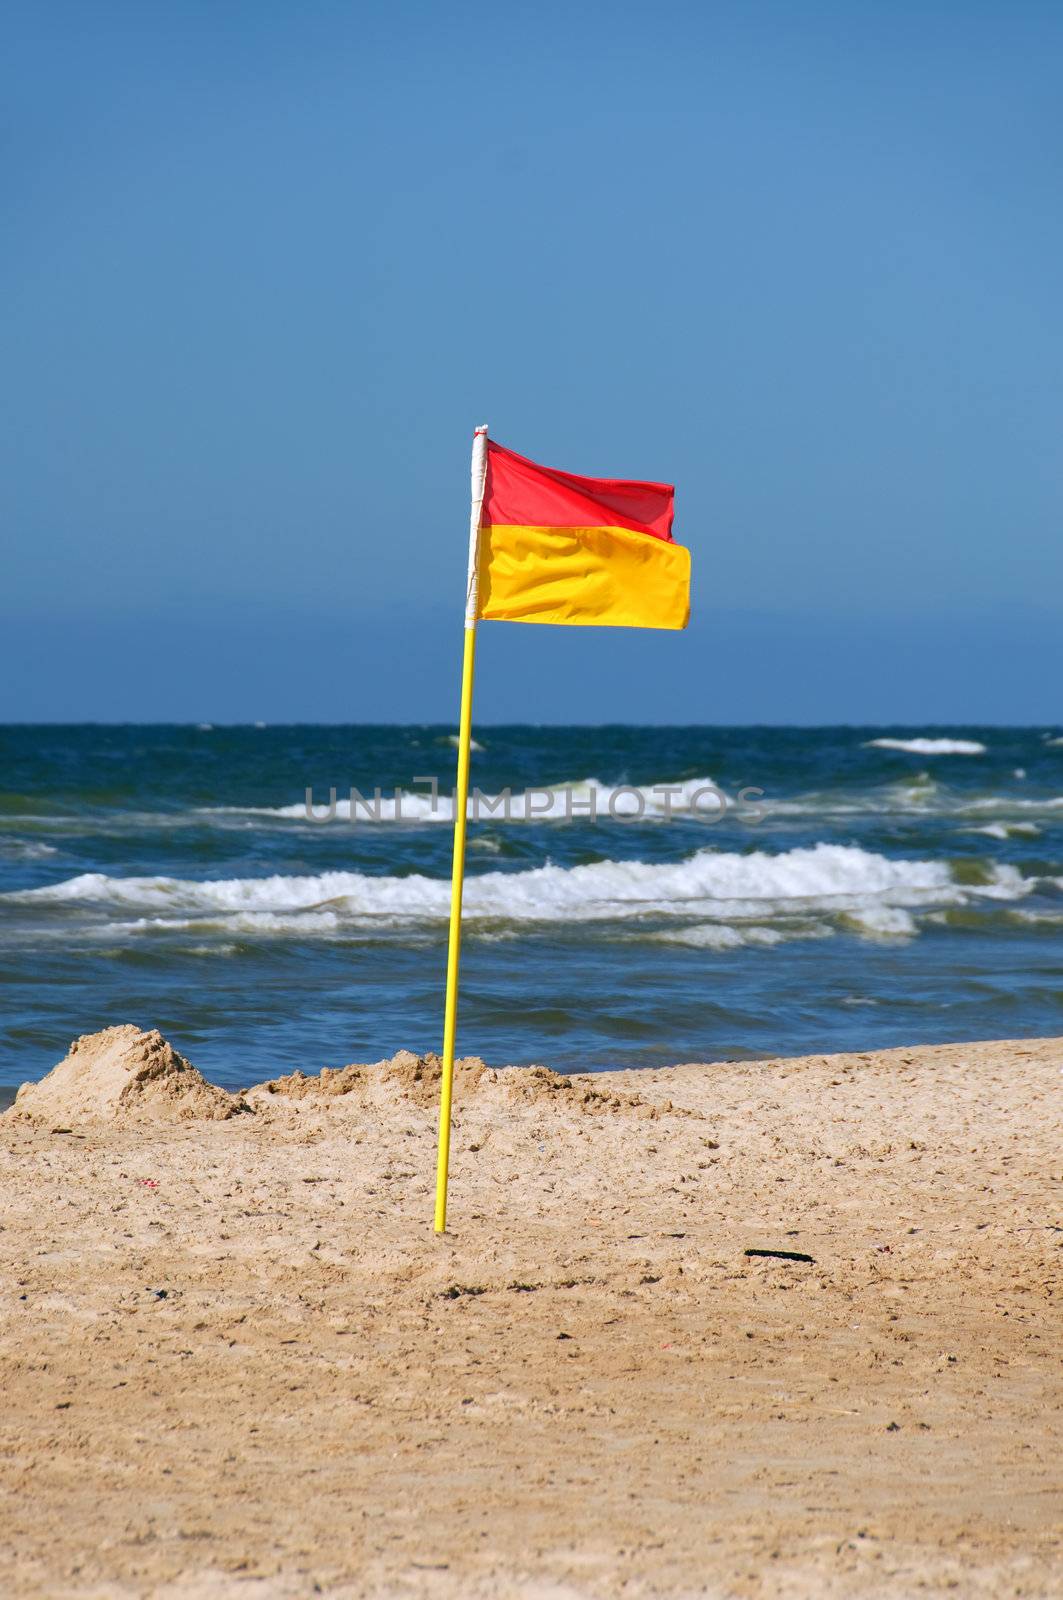 Lifeguard flag by GryT